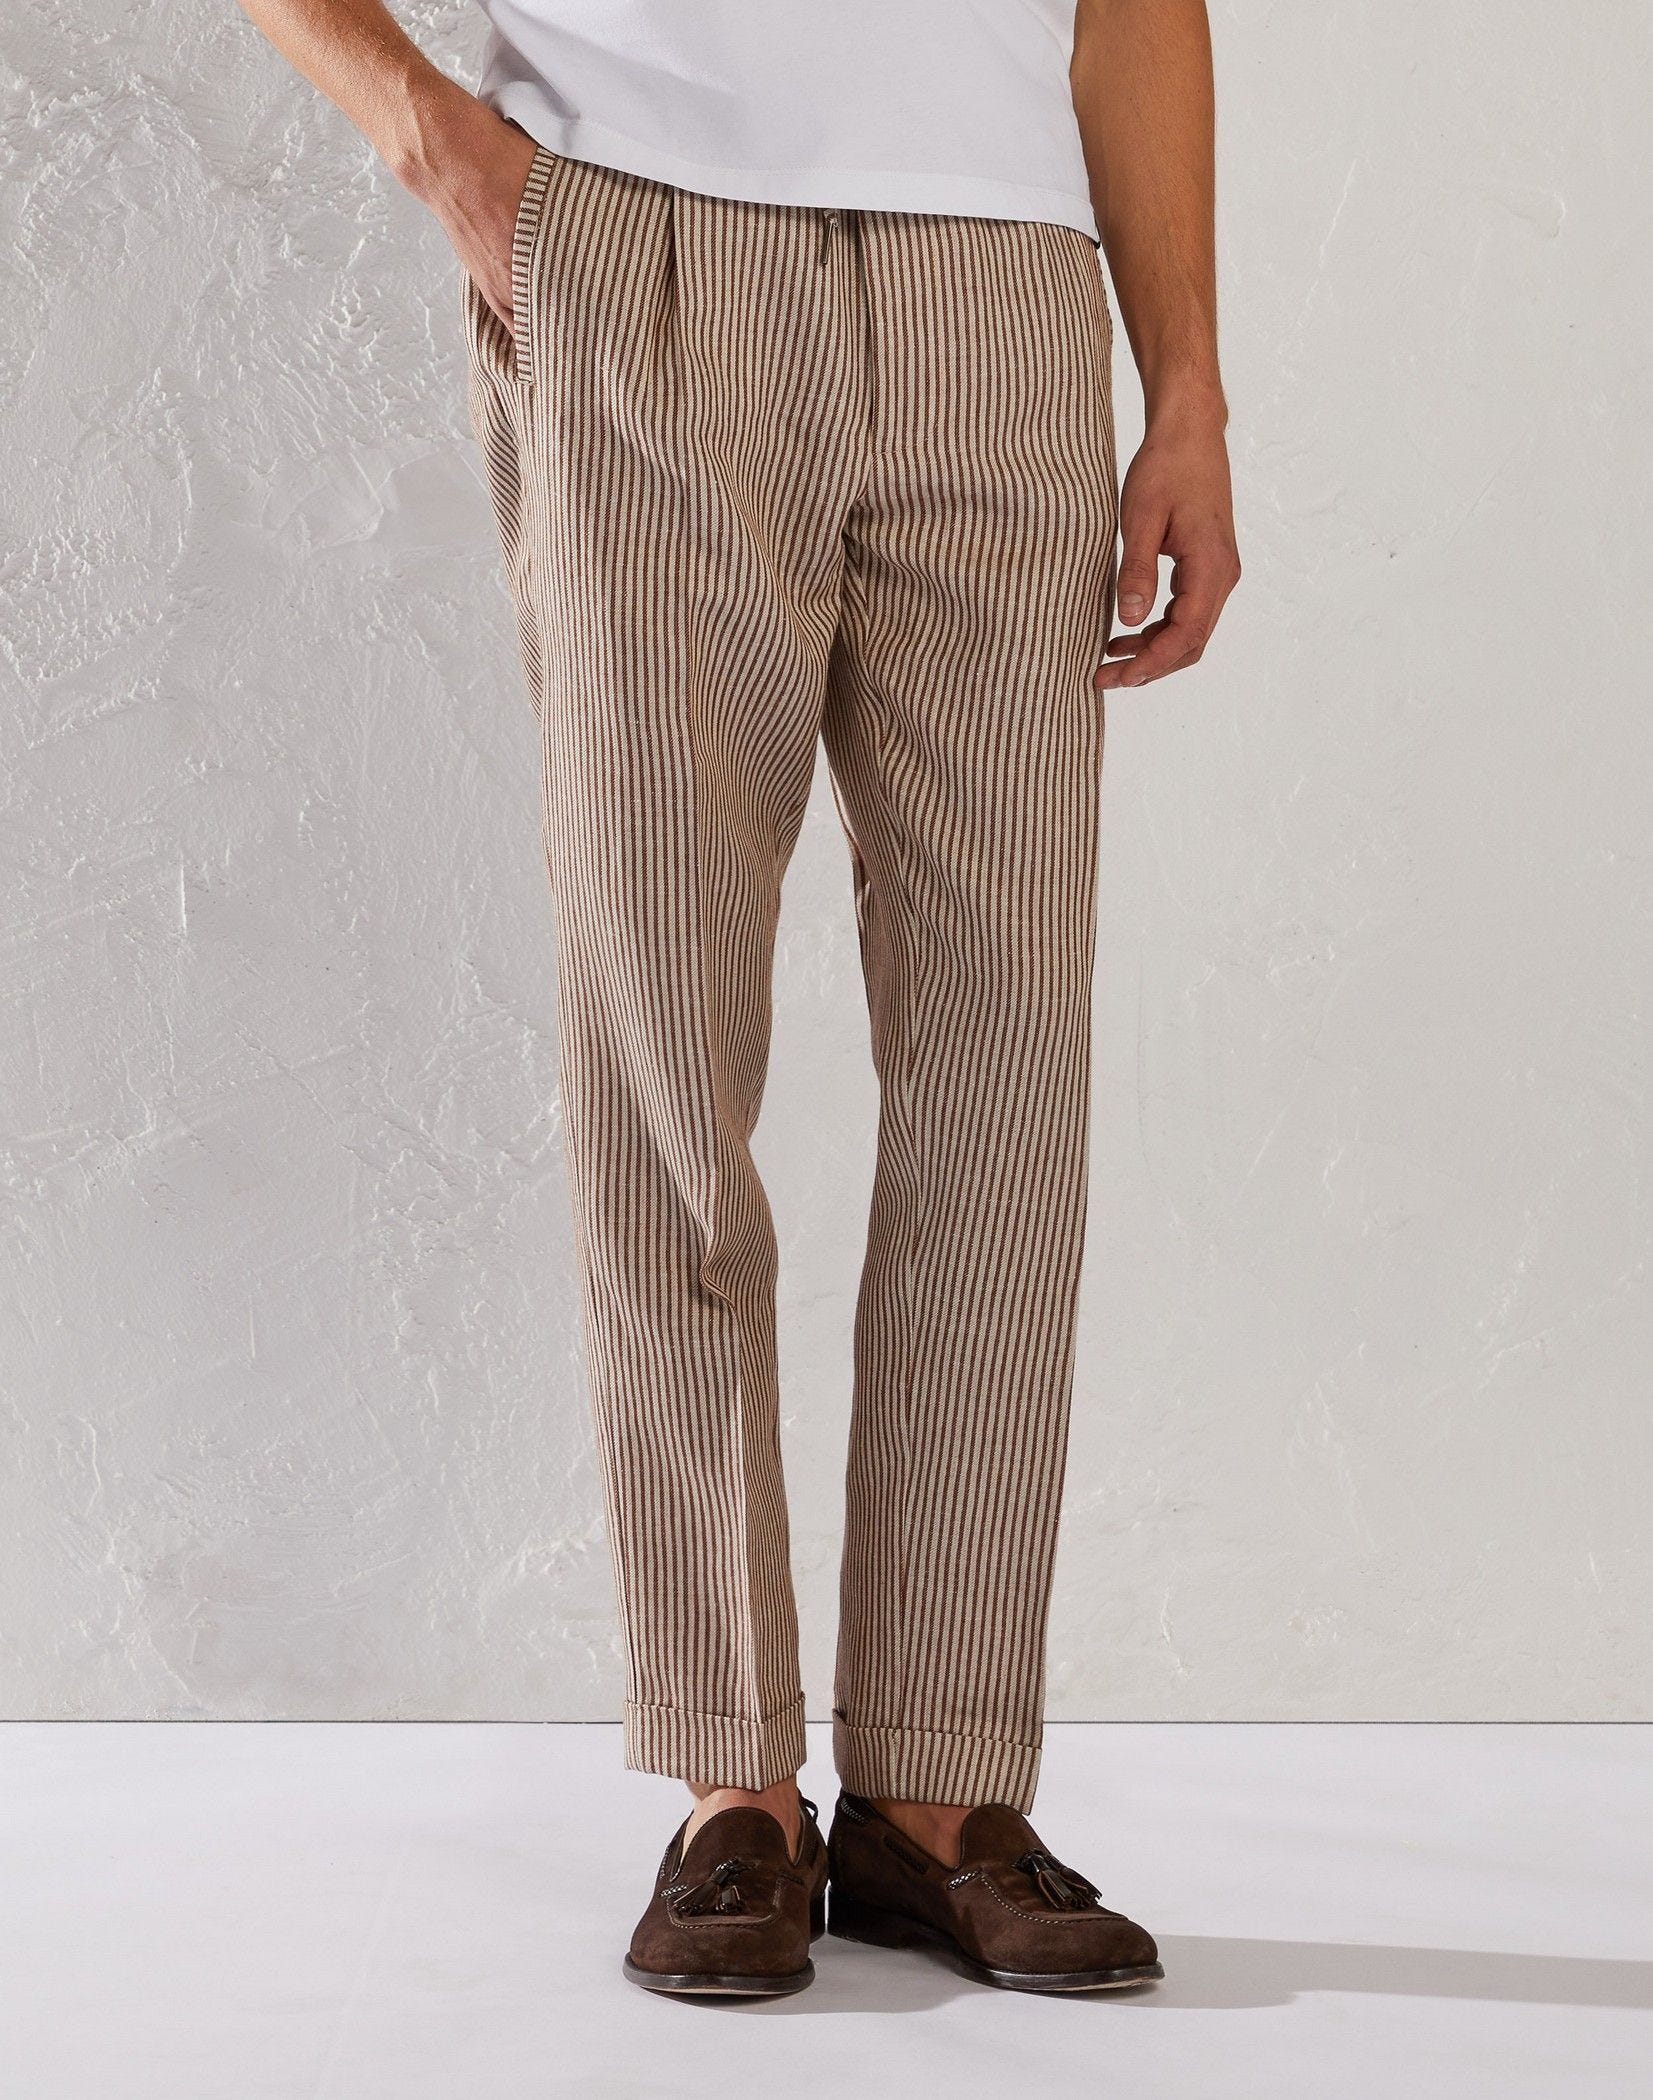 Casual two-tone striped cotton and linen trousers